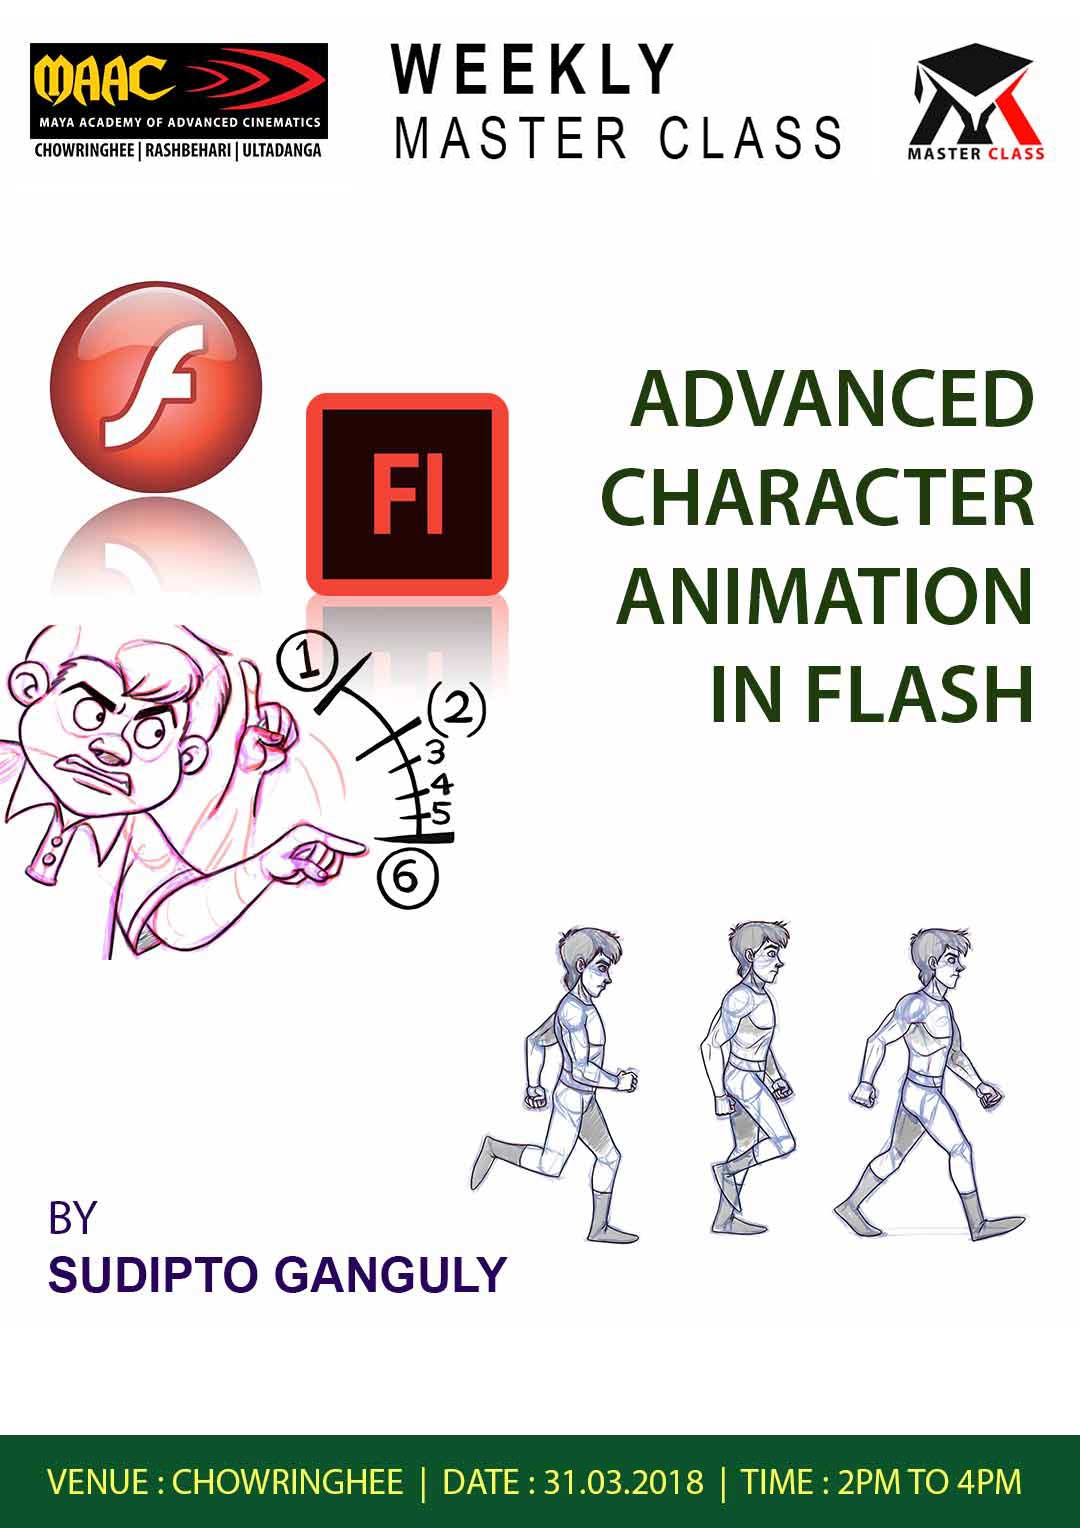 Weekly Master Class on Advanced Character animation in Flash